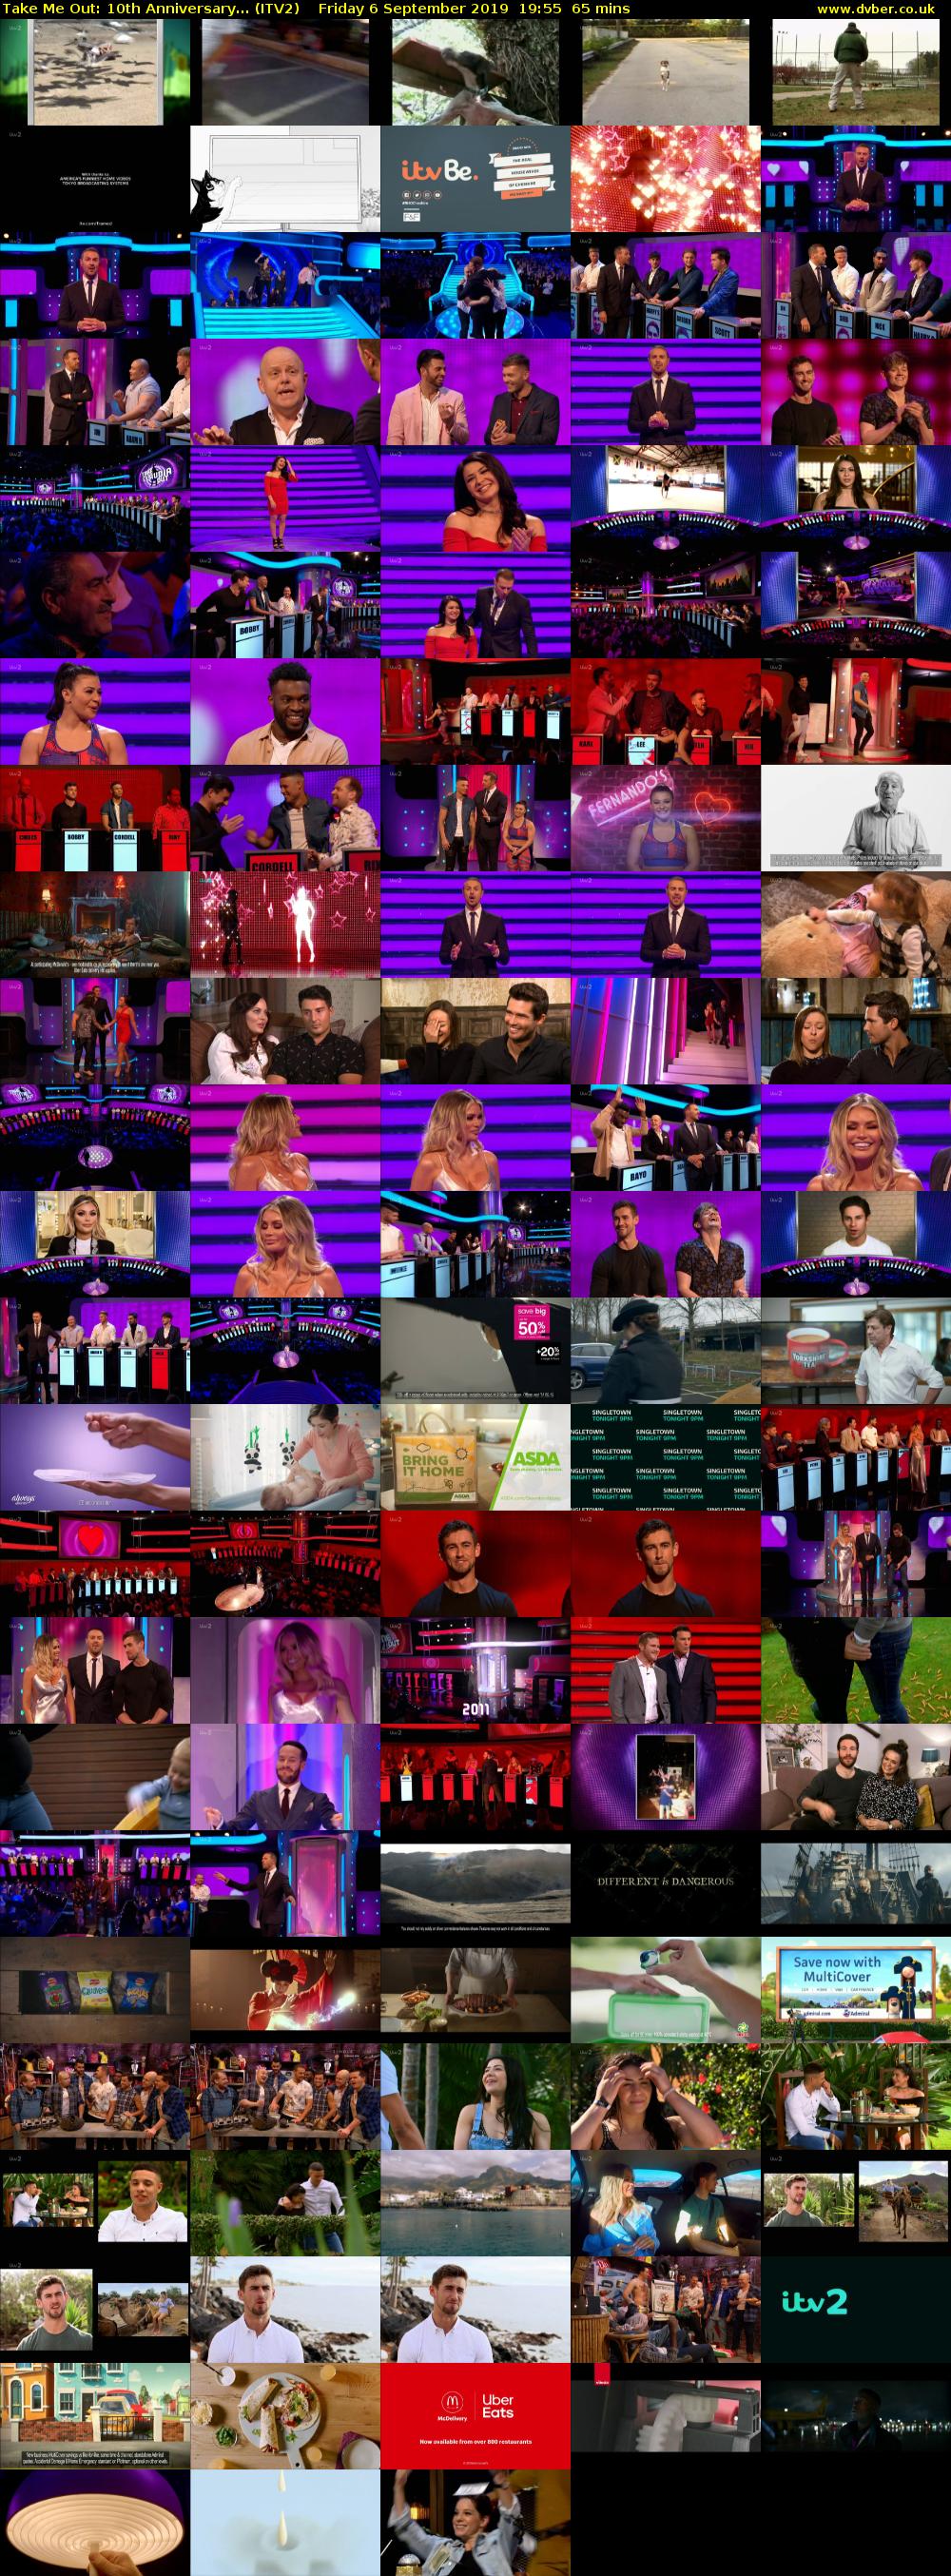 Take Me Out: 10th Anniversary... (ITV2) Friday 6 September 2019 19:55 - 21:00